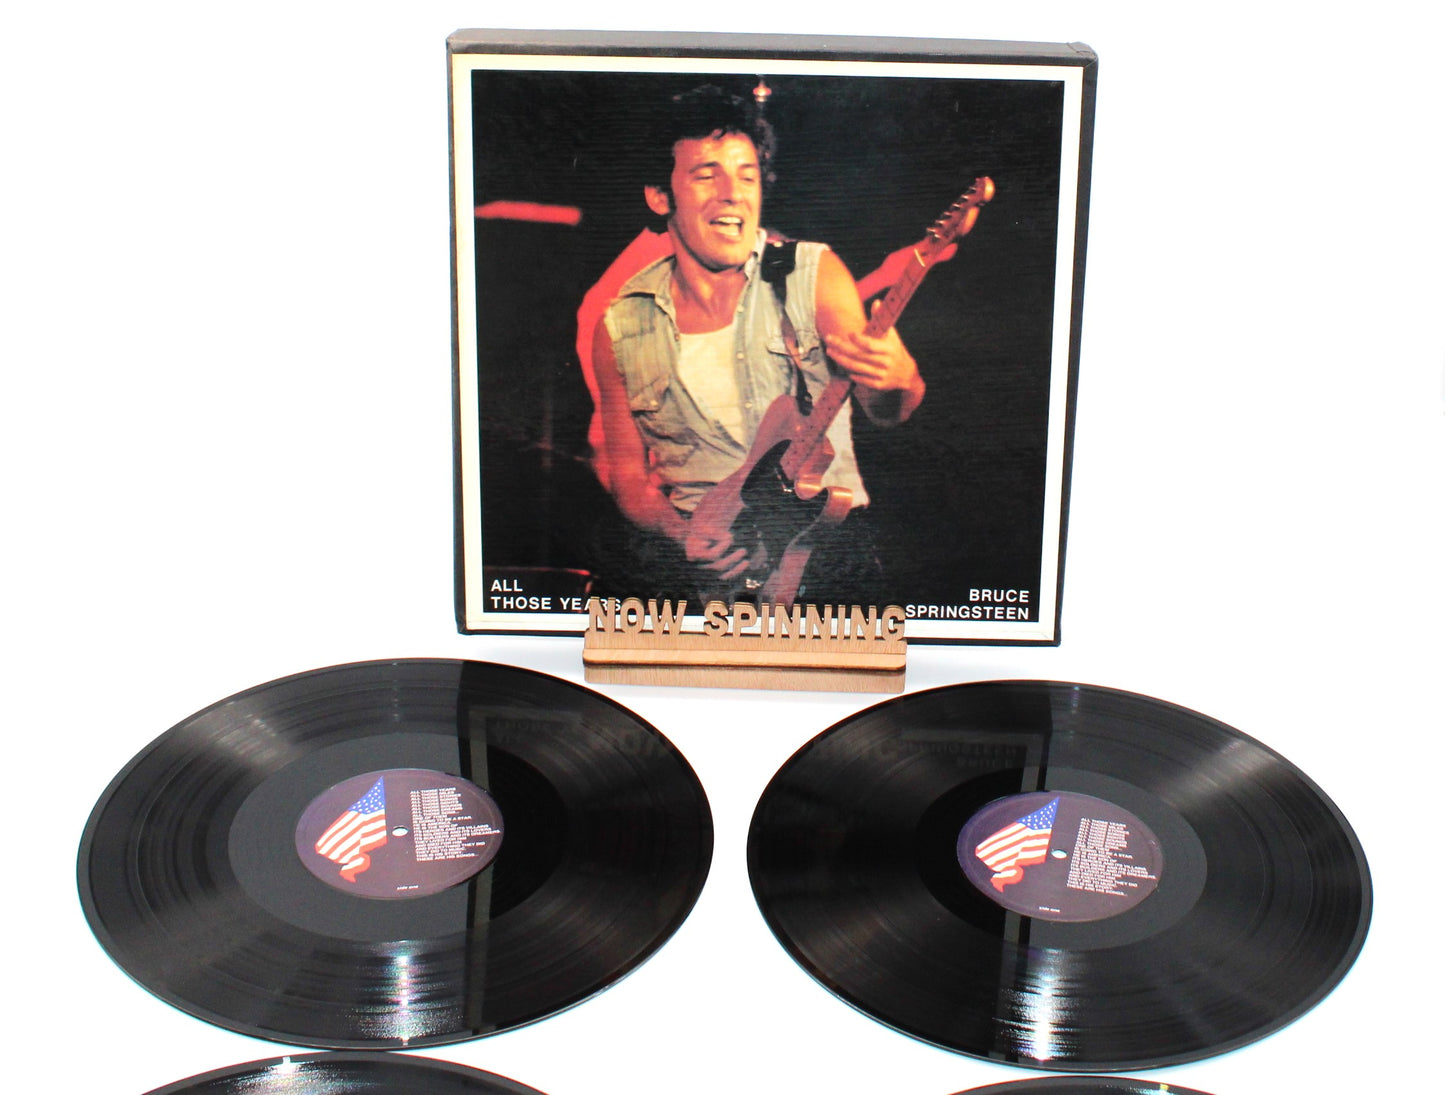 BRUCE SPRINGSTEEN - ALL THOSE YEARS - 10 LP BOX SET UNOFFICIAL - NEAR MINT